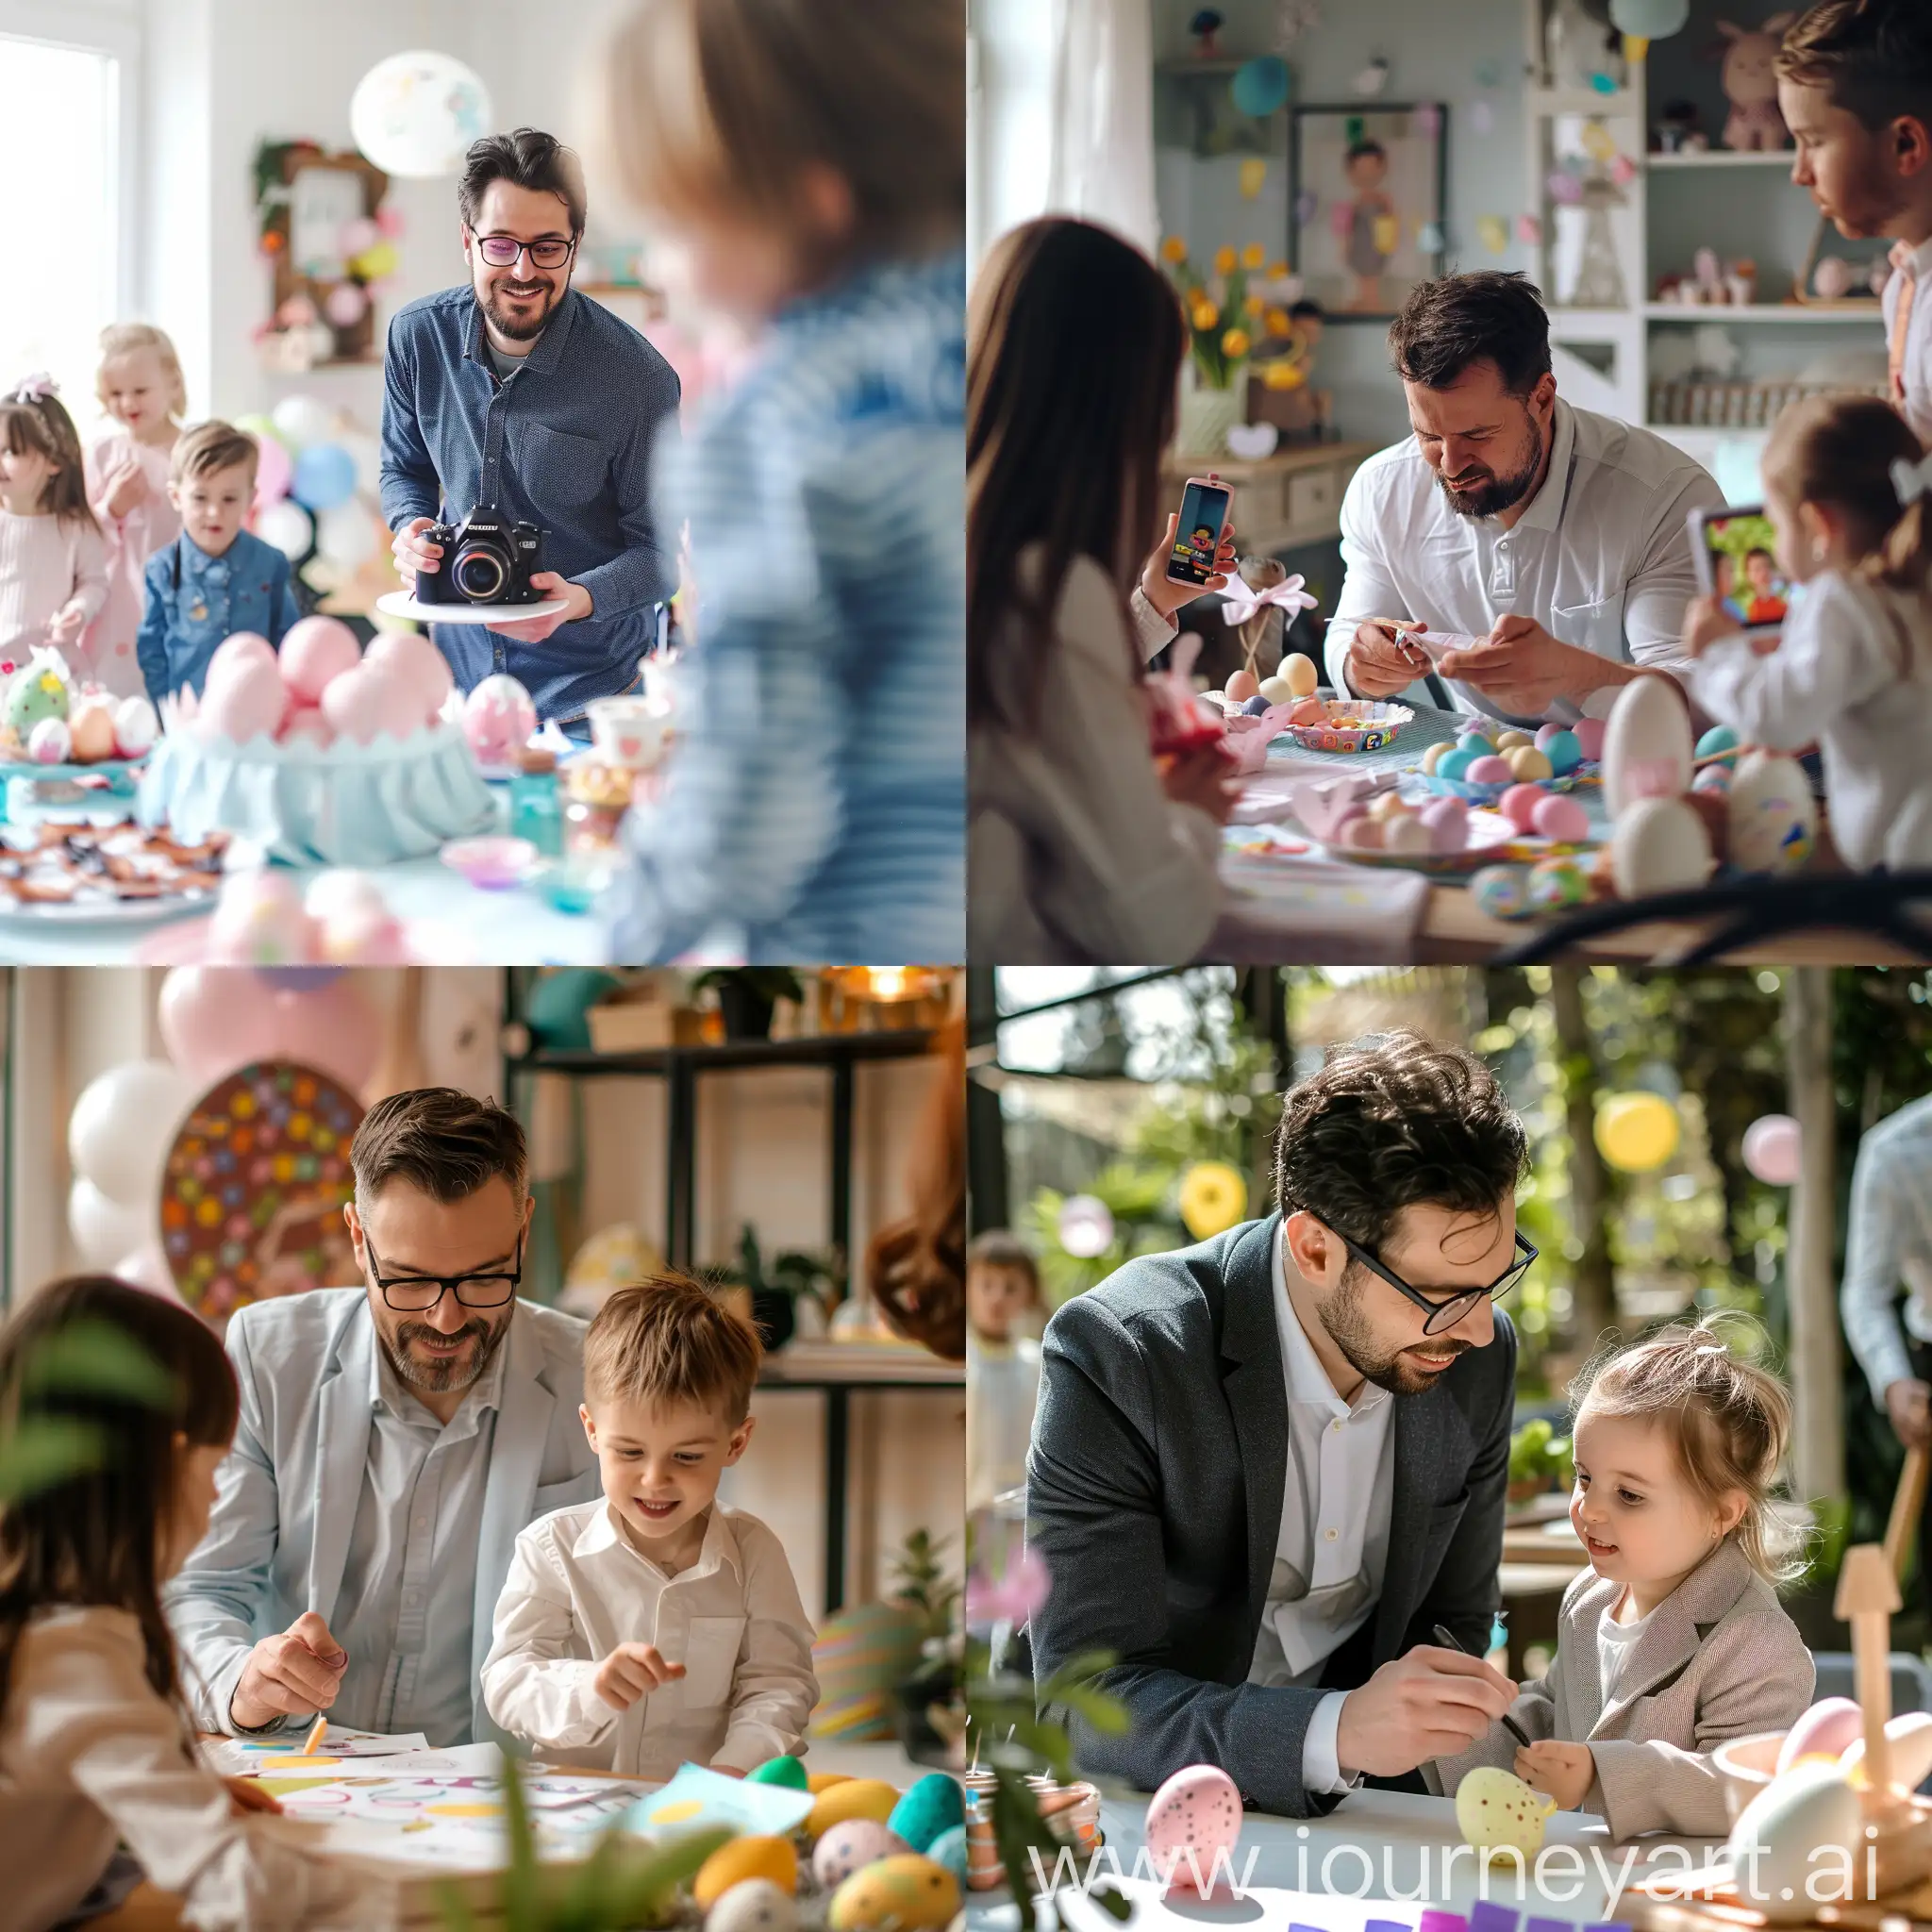 Android-Developer-Crafting-Business-Images-at-a-Joyful-Childrens-Easter-Gathering